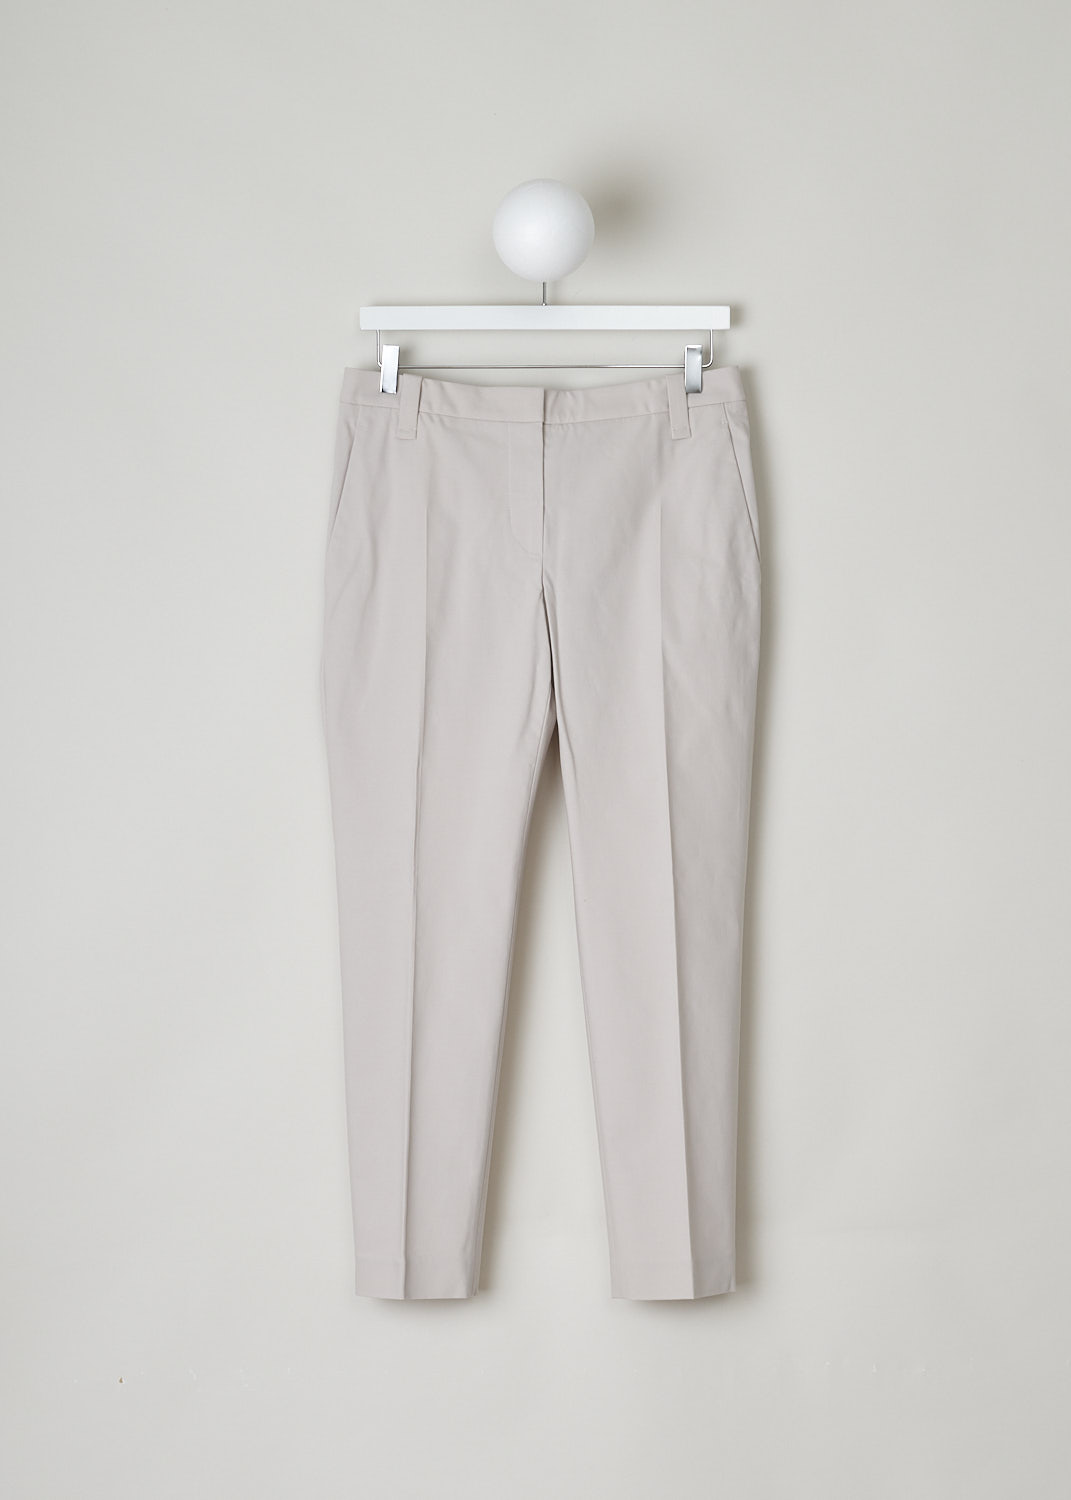 BRUNELLO CUCINELLI, BEIGE MID-RISE PANTS, M0F70P1995_C2837, Beige, Front, These beige mid-rise pants have a waistband with belt loops and a concealed clasp and zip closure. In the front, these pants have slanted pockets. In the back, two welt pocket can be found. Centre creases run along the length of the tapered leg.
